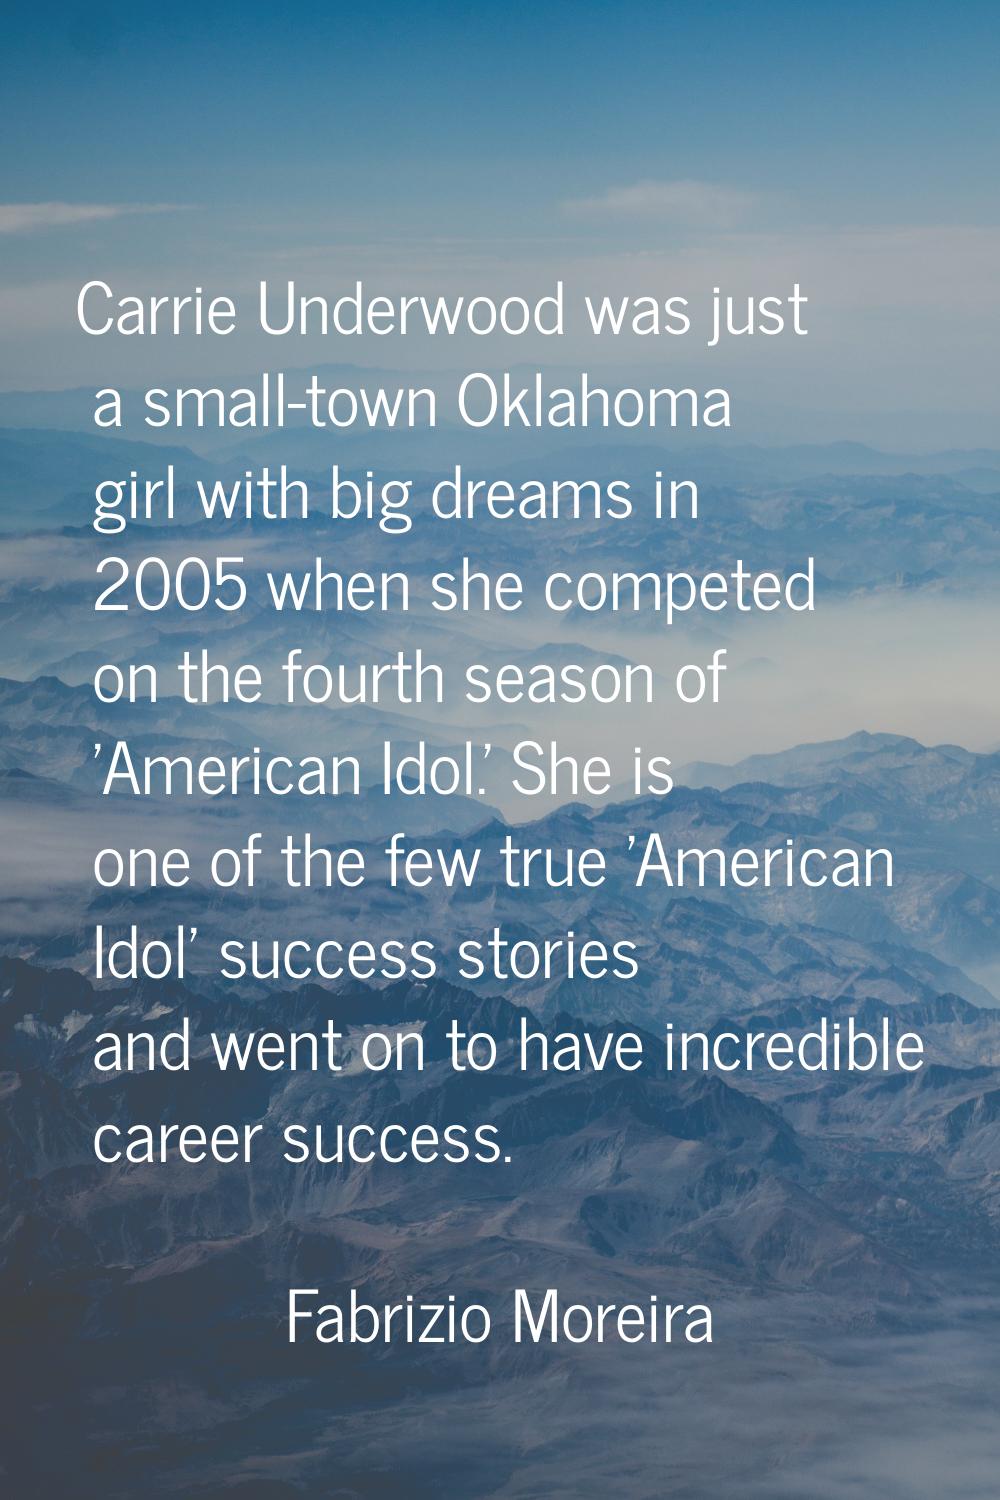 Carrie Underwood was just a small-town Oklahoma girl with big dreams in 2005 when she competed on t